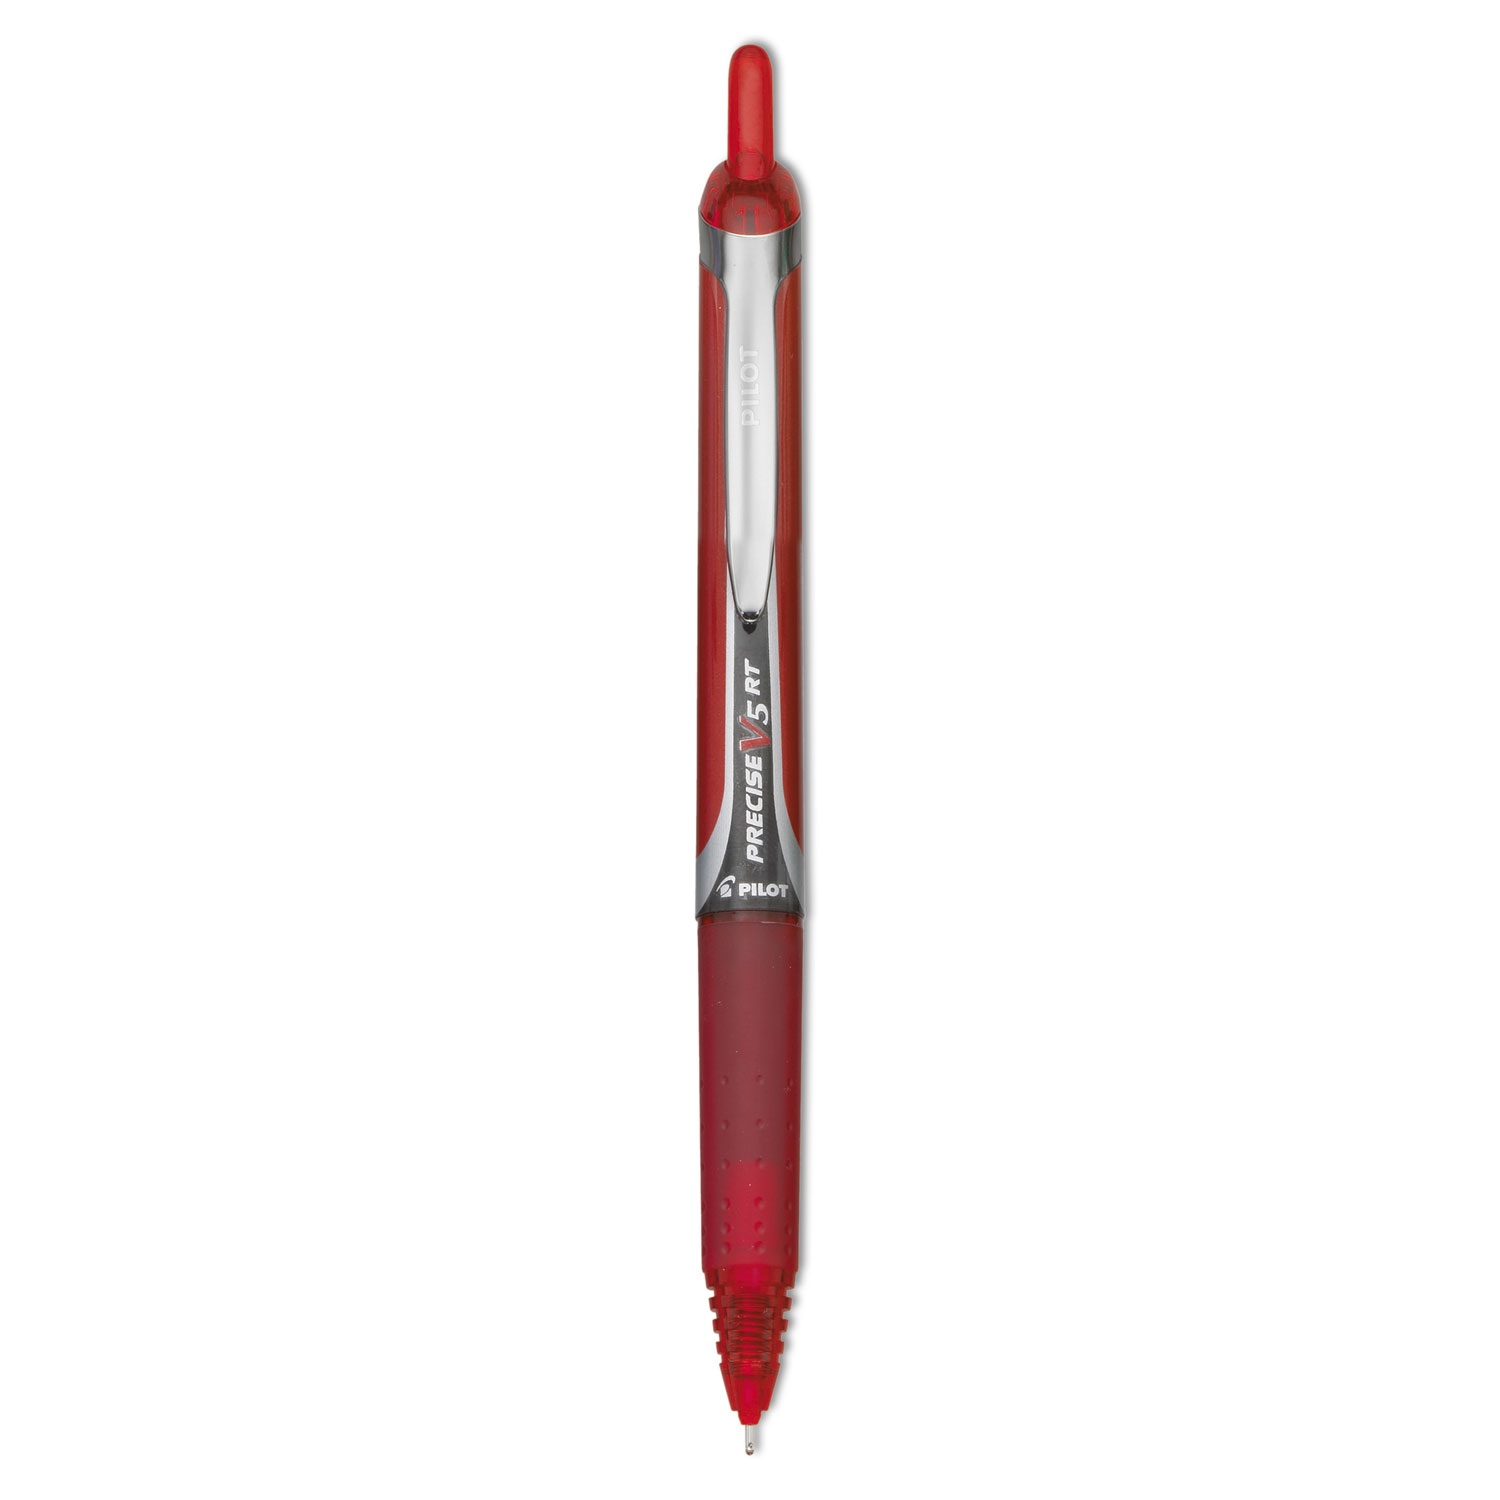  Pilot 26064 Precise V5RT Retractable Roller Ball Pen, Extra-Fine 0.5mm, Red Ink, Red Barrel (PIL26064) 